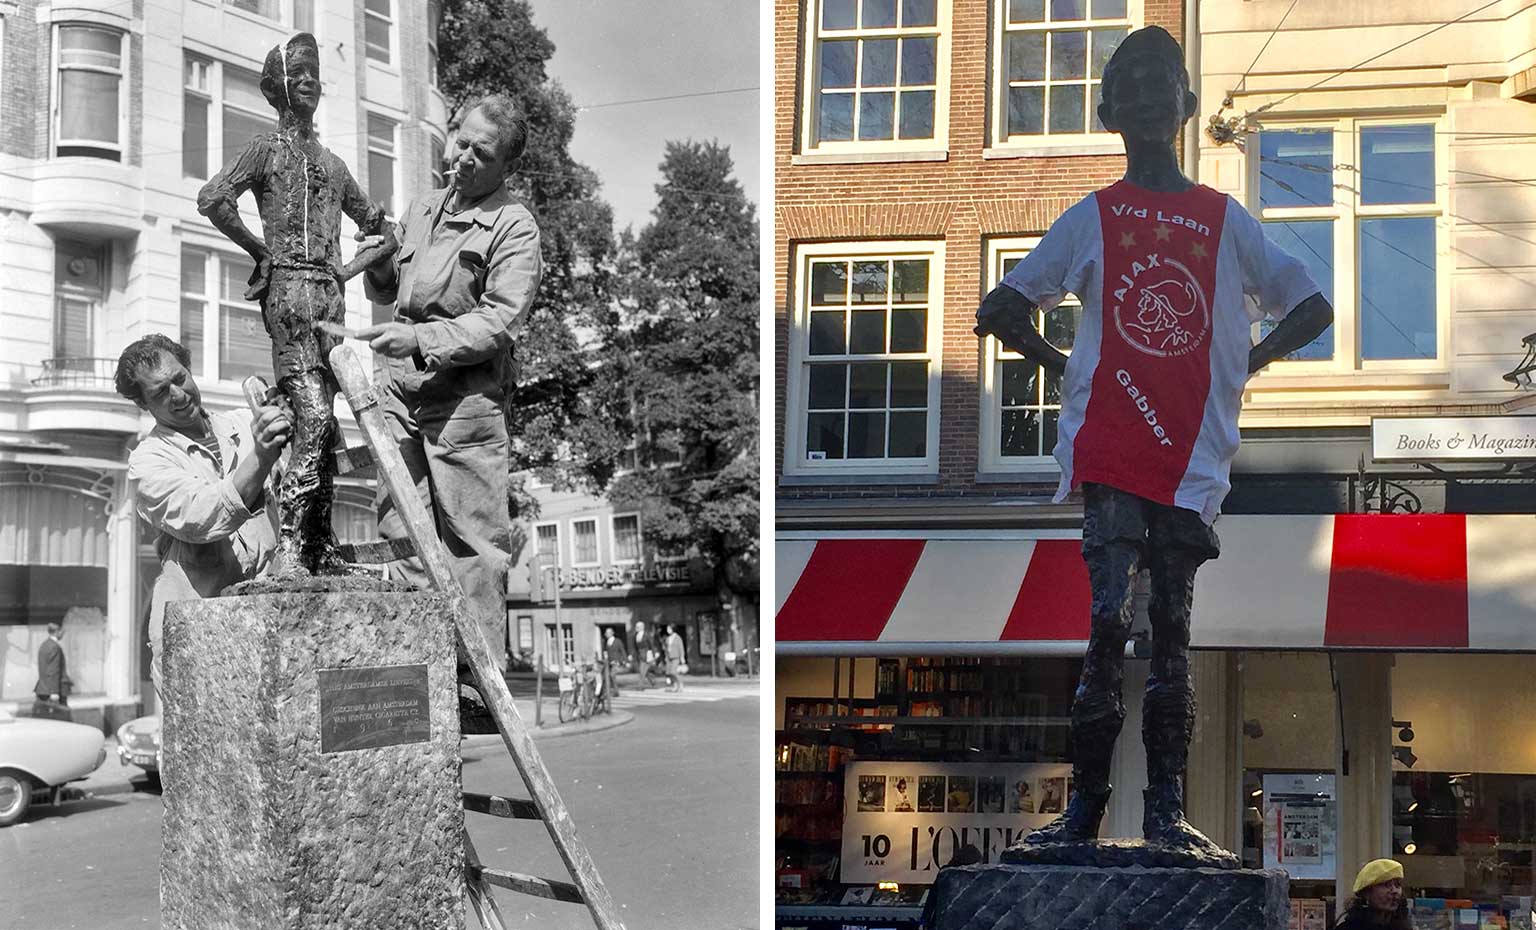 Left: Lieverdje statue, Amsterdam, being cleaned in 1965 - Right: Lieverdje dressed up in Ajax football shirt